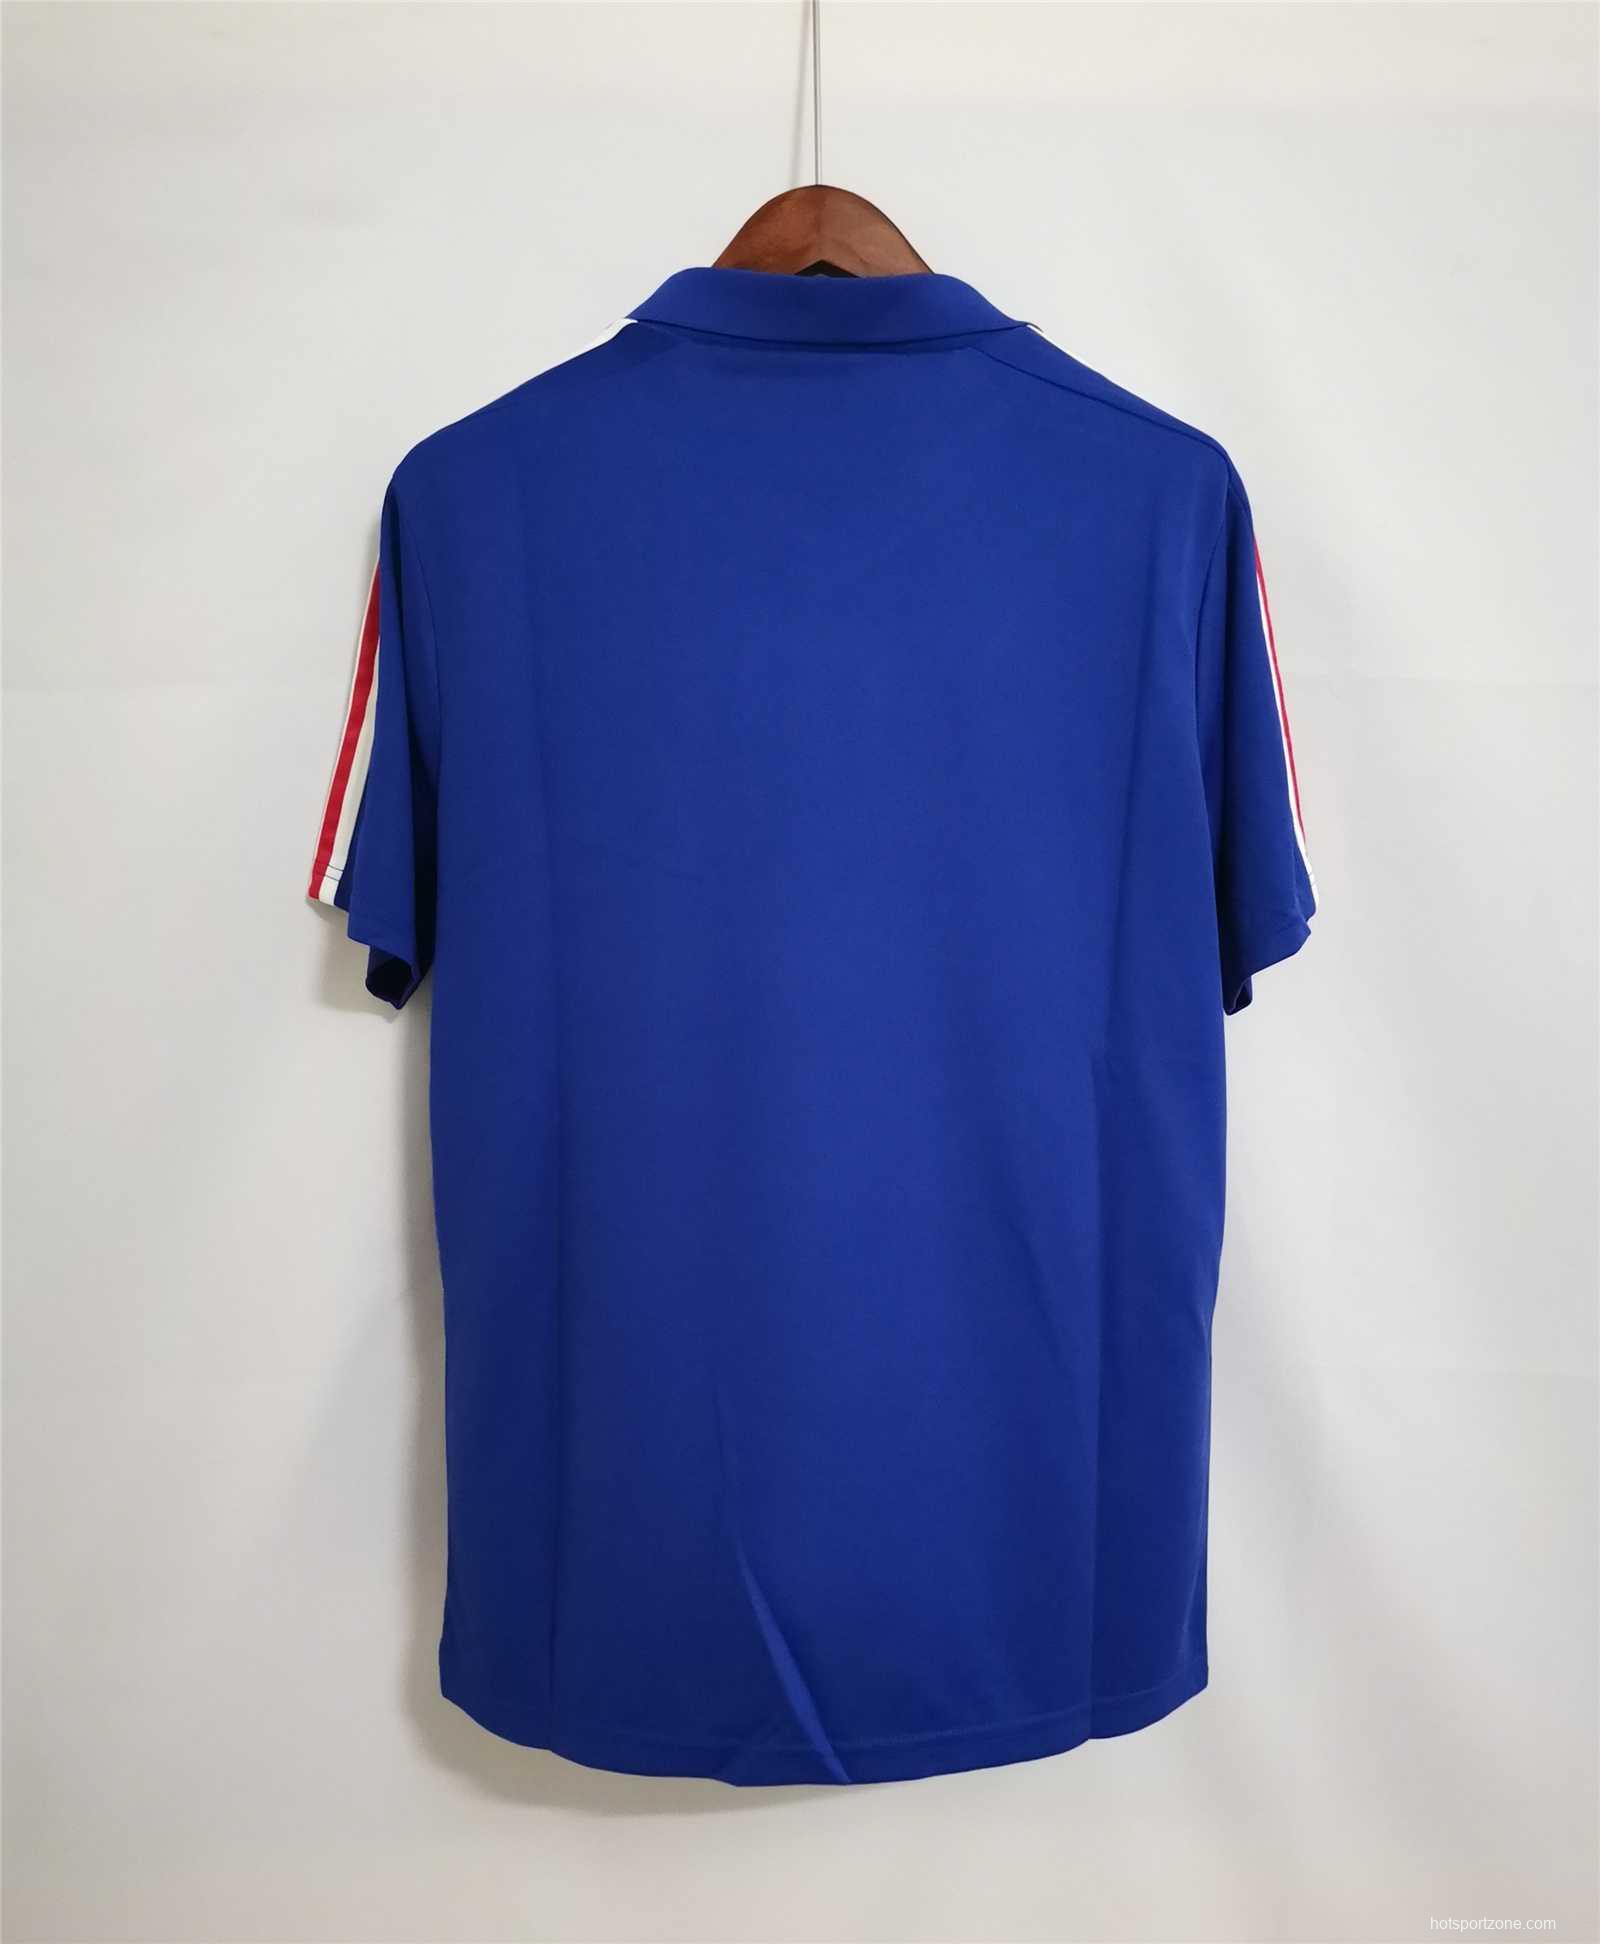 Retro 1984 France Home Soccer Jersey